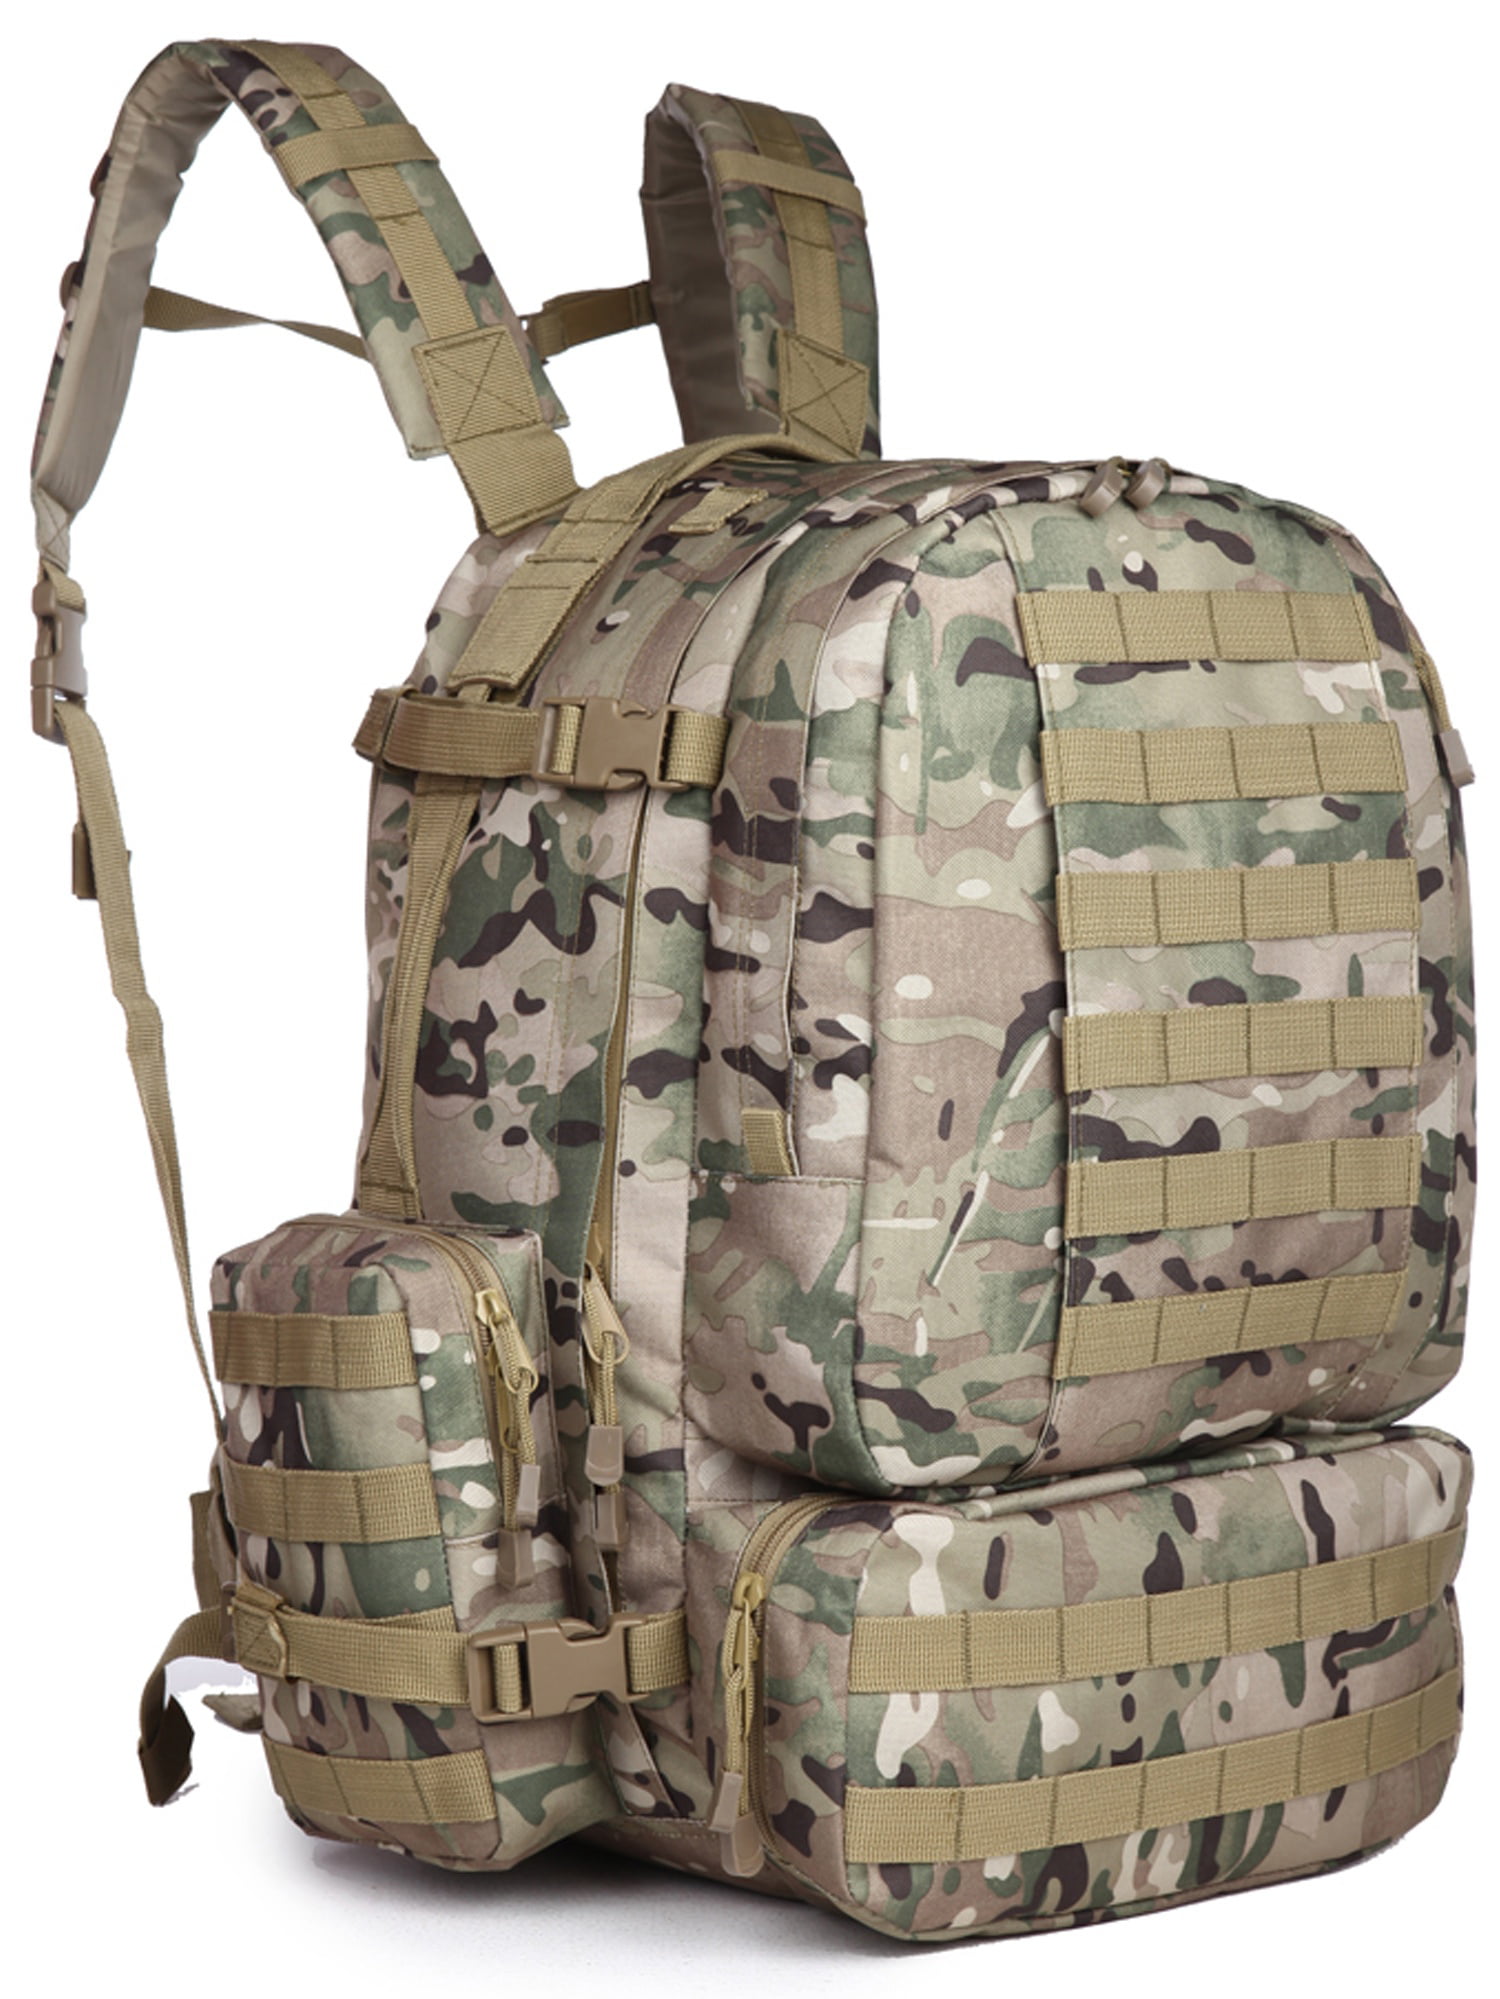 Outdoor Military Tactical Molle Patrol Backpack Sport Camping Hiking Trekking 